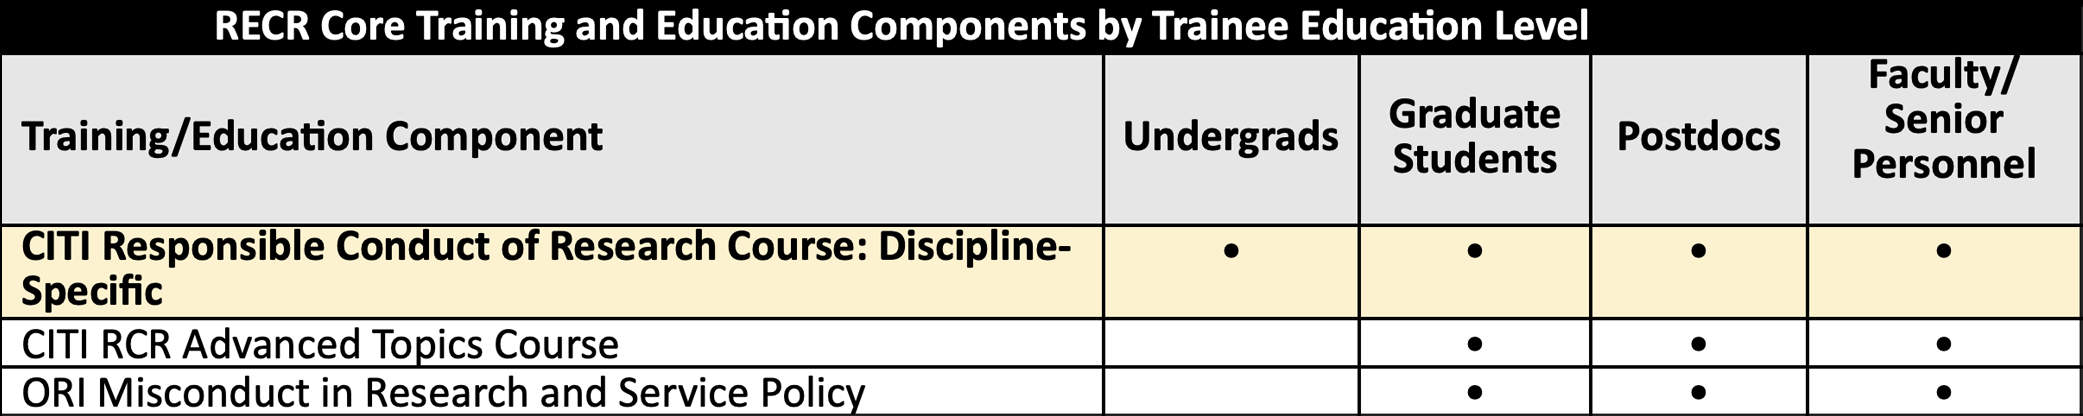 RECR Core Training and Education Components by Trainee Education Level